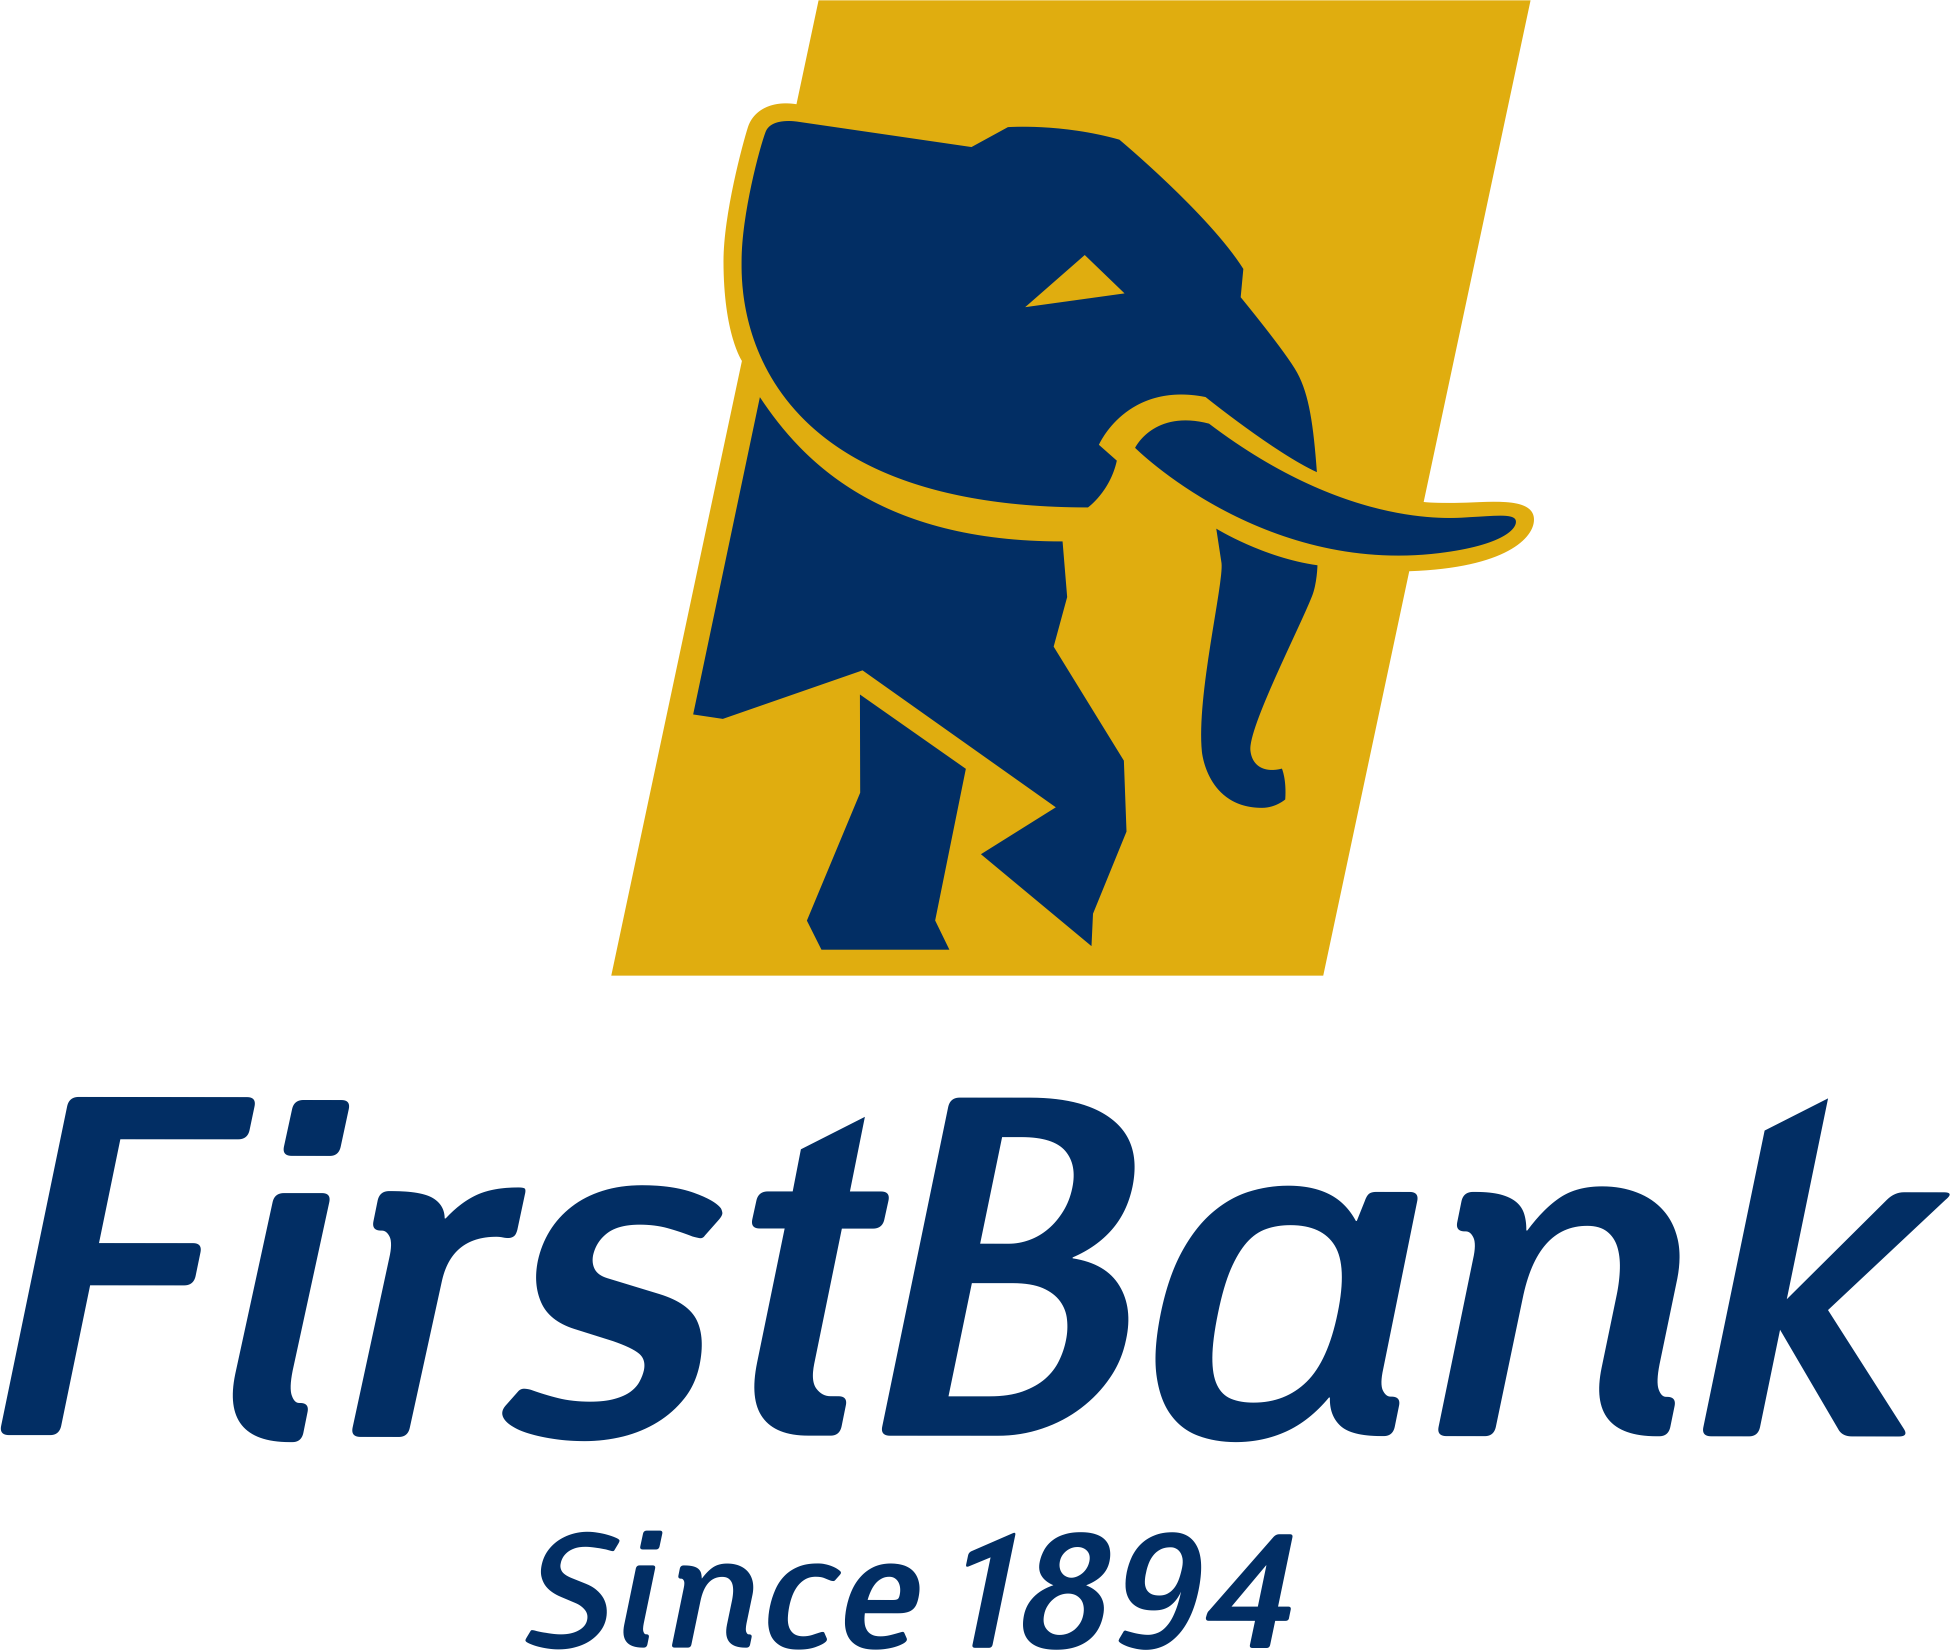 Firstbank Joins Together With The CDC/BII To Empower Women And Small Business Owners With A $100 Million Lending Facility.